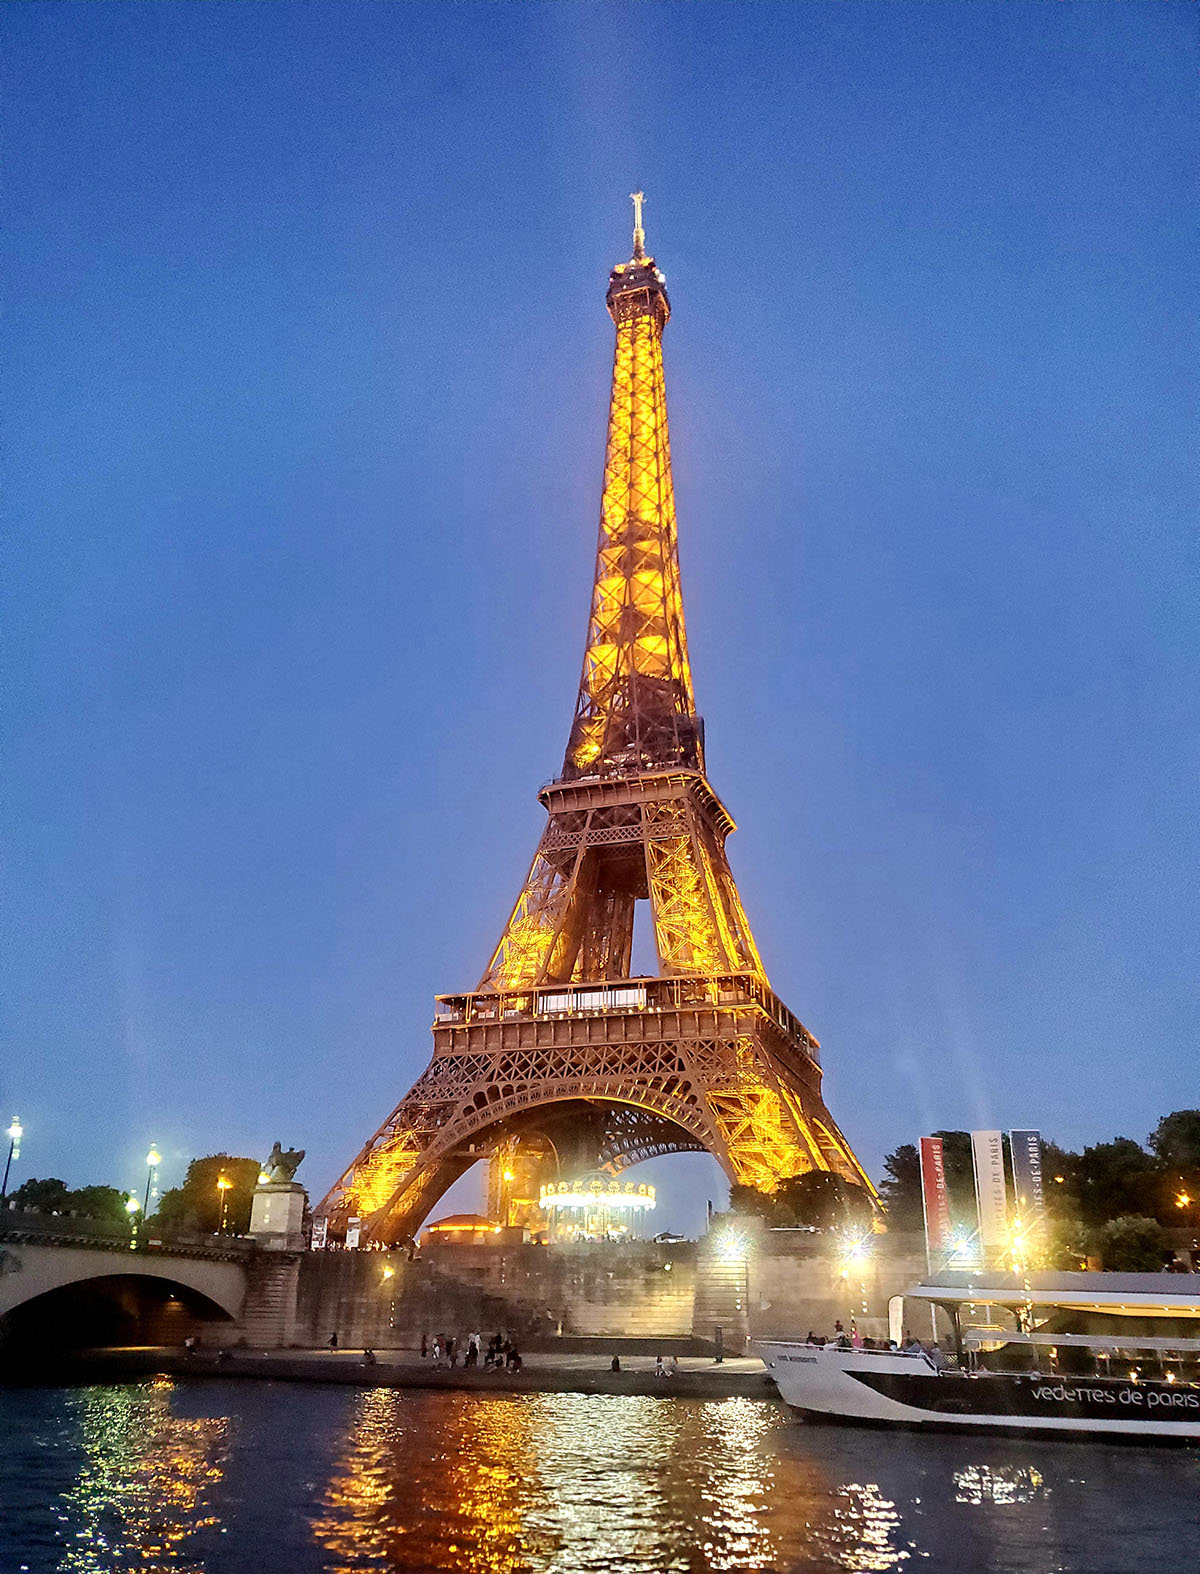 The Eiffel Tower in Paris, France lit up during dusk.